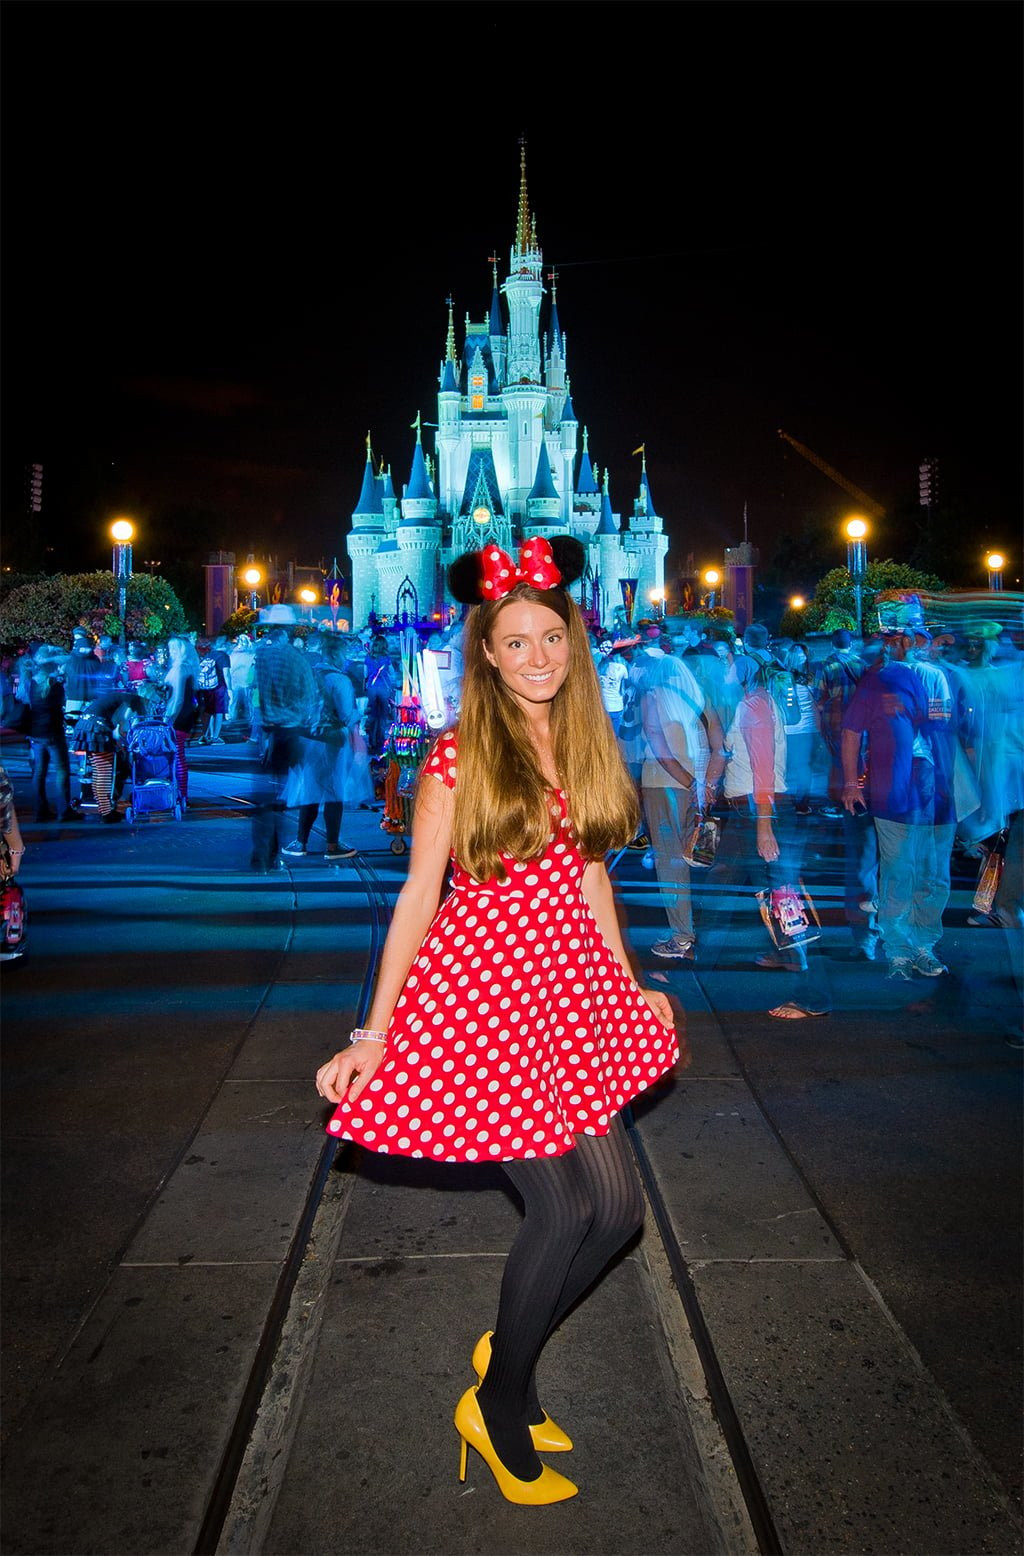 Halloween Party Dress Up Ideas
 Sarah s Mickey s Not So Scary Halloween Party Costume